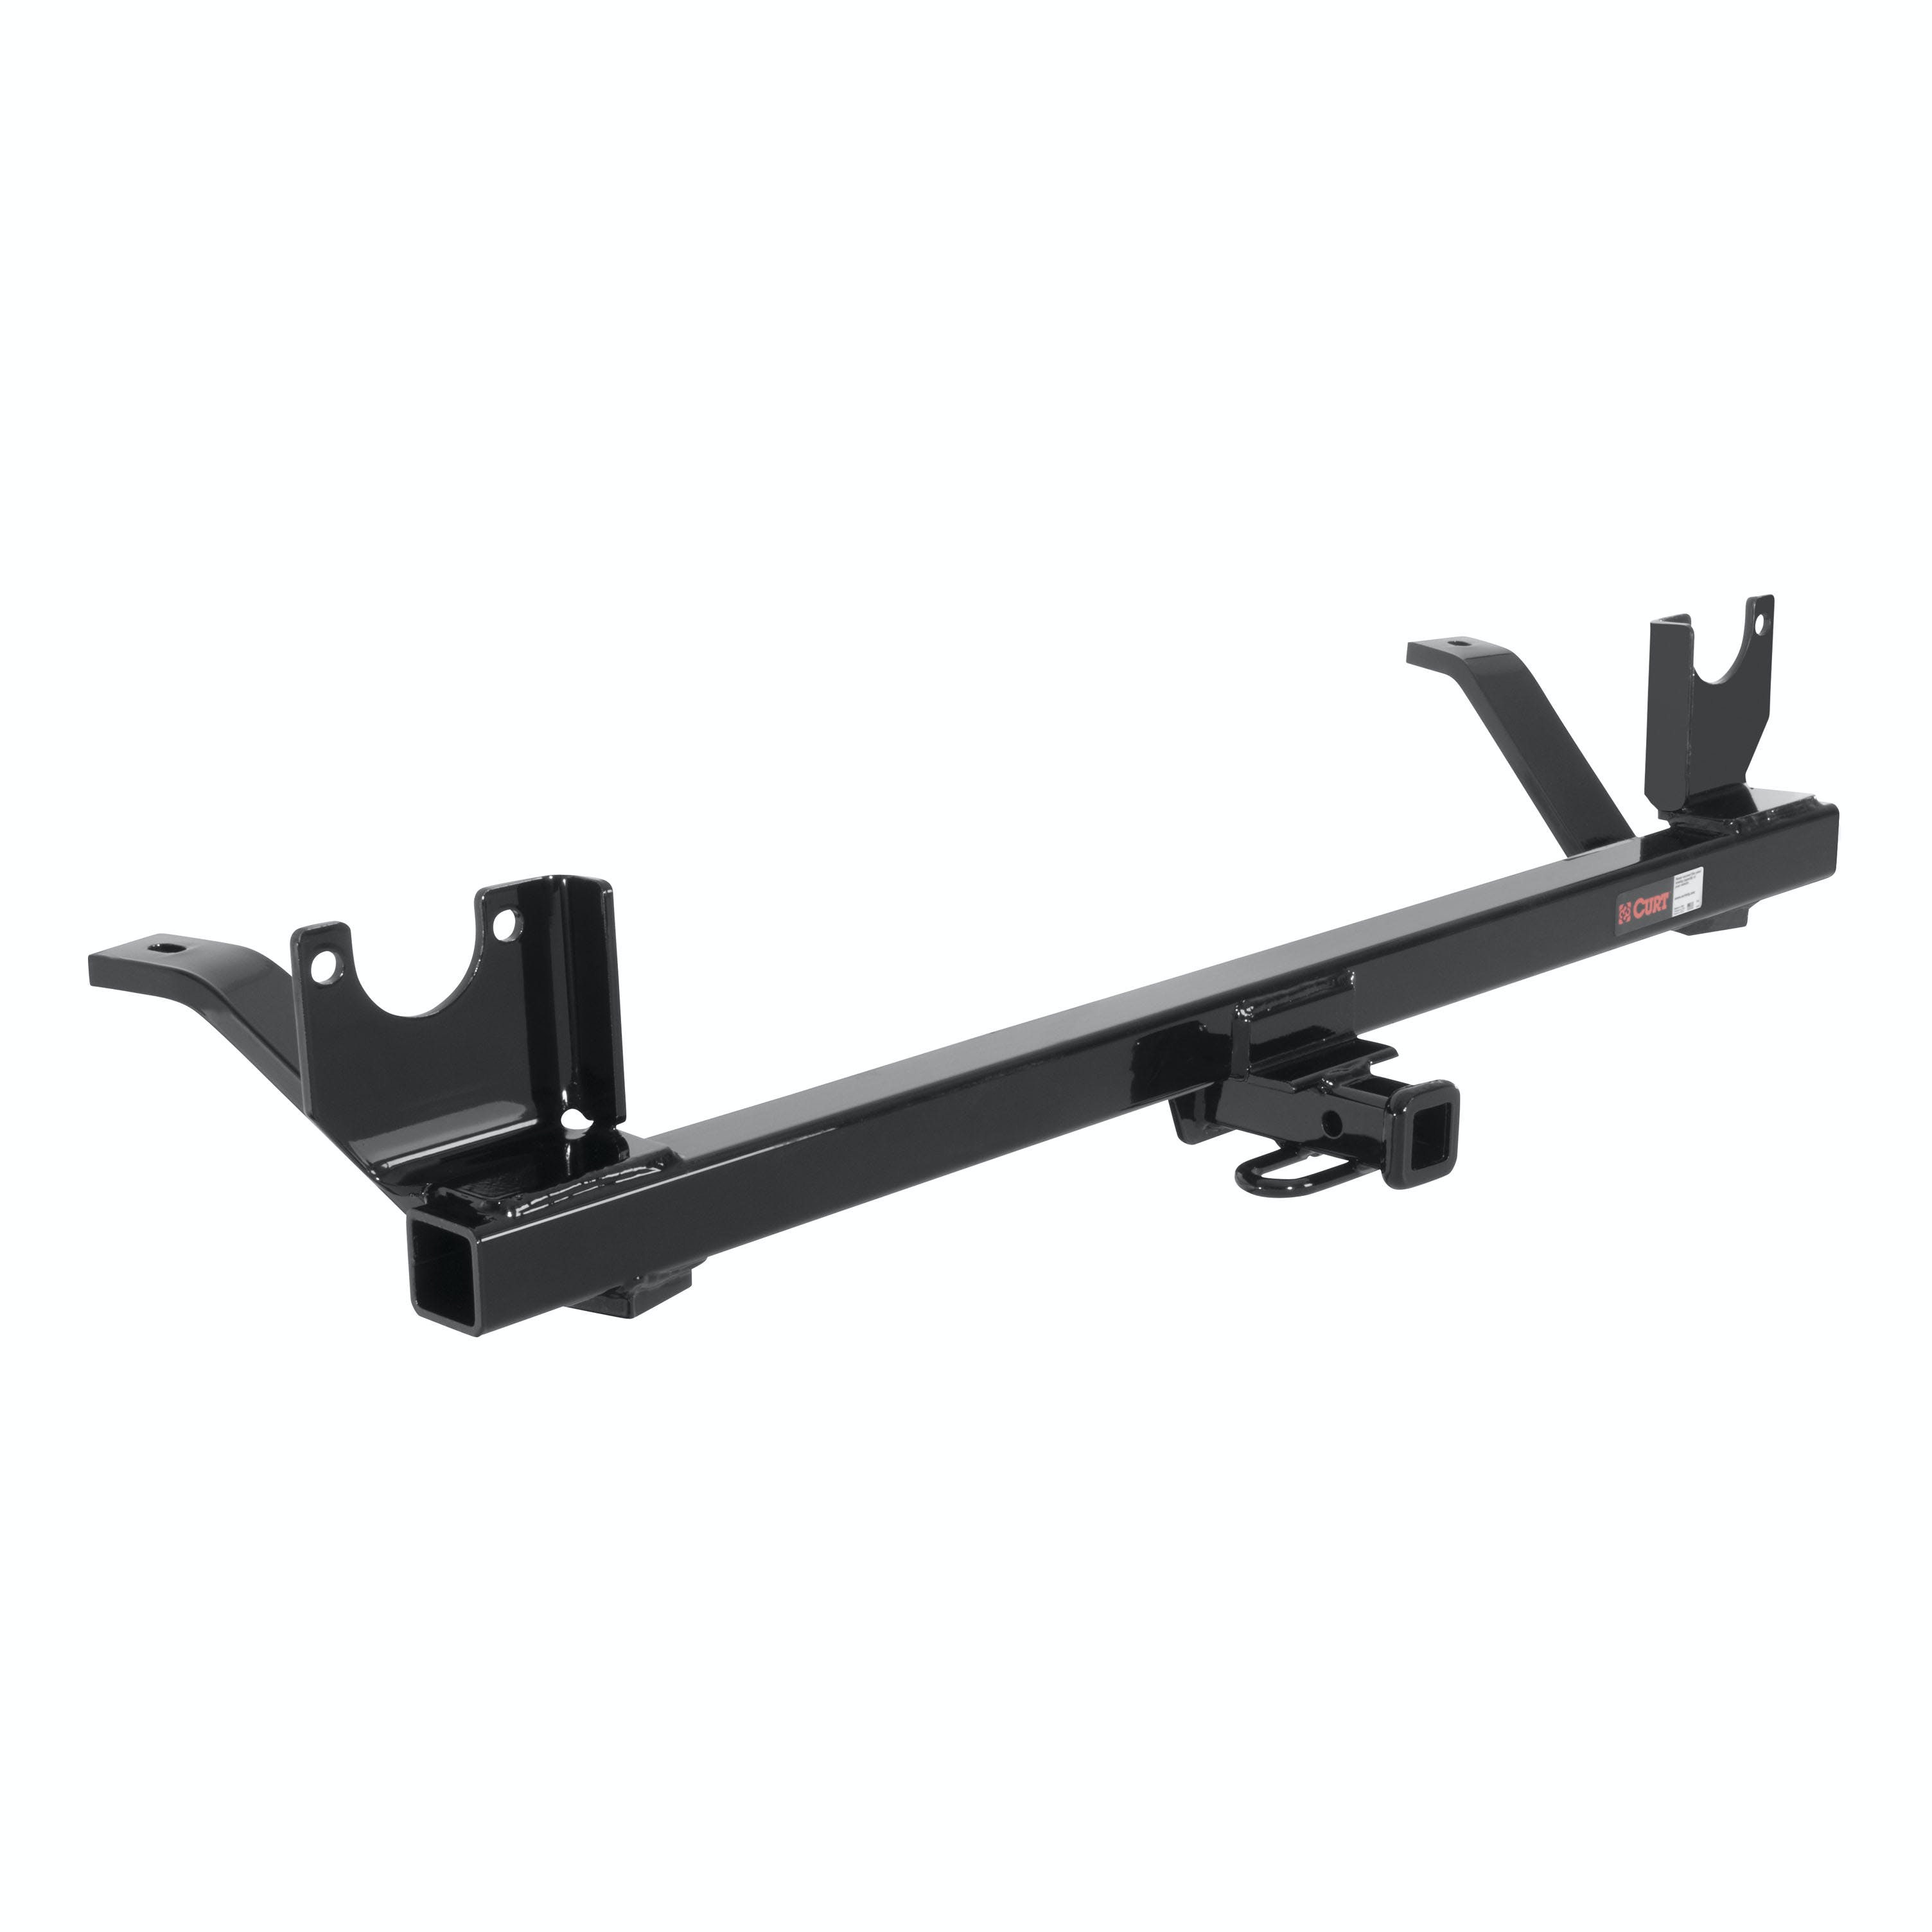 CURT 12025 Class 2 Hitch, 1-1/4 Receiver, Select Chrysler, Dodge, Plymouth Vehicles